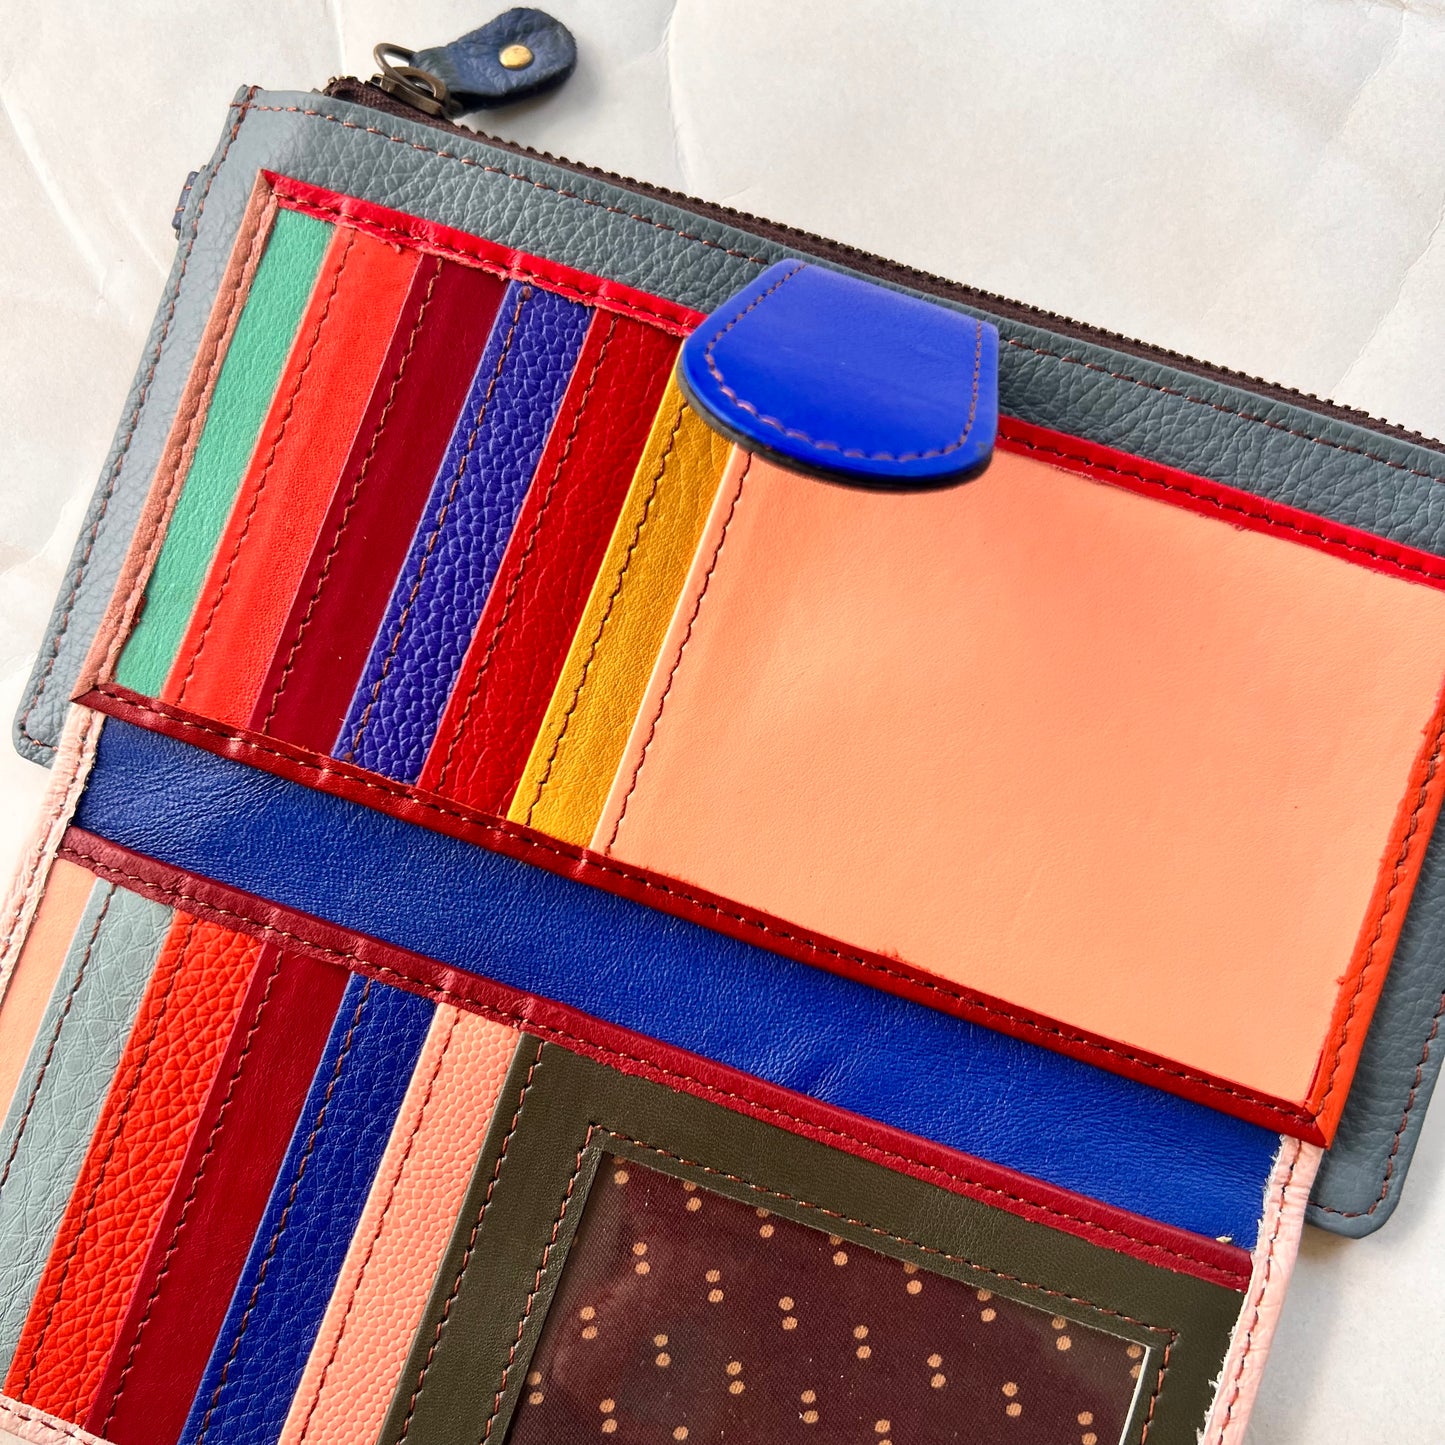 interior view of kimber wallet showing colorful card slots, pockets, and clear spot for ID.